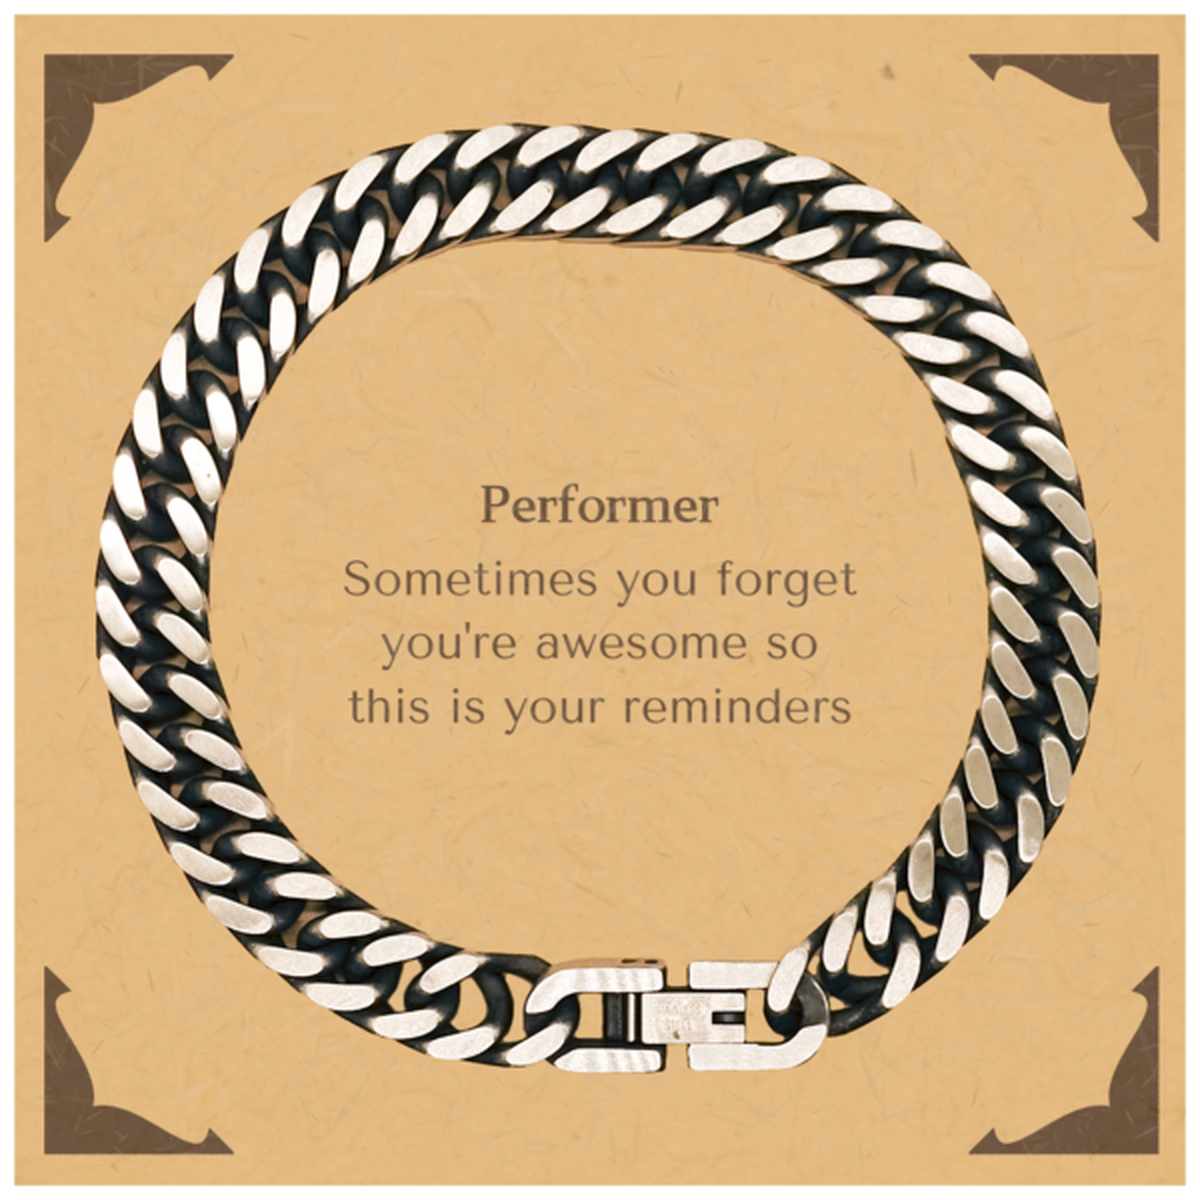 Sentimental Performer Cuban Link Chain Bracelet, Performer Sometimes you forget you're awesome so this is your reminders, Graduation Christmas Birthday Gifts for Performer, Men, Women, Coworkers